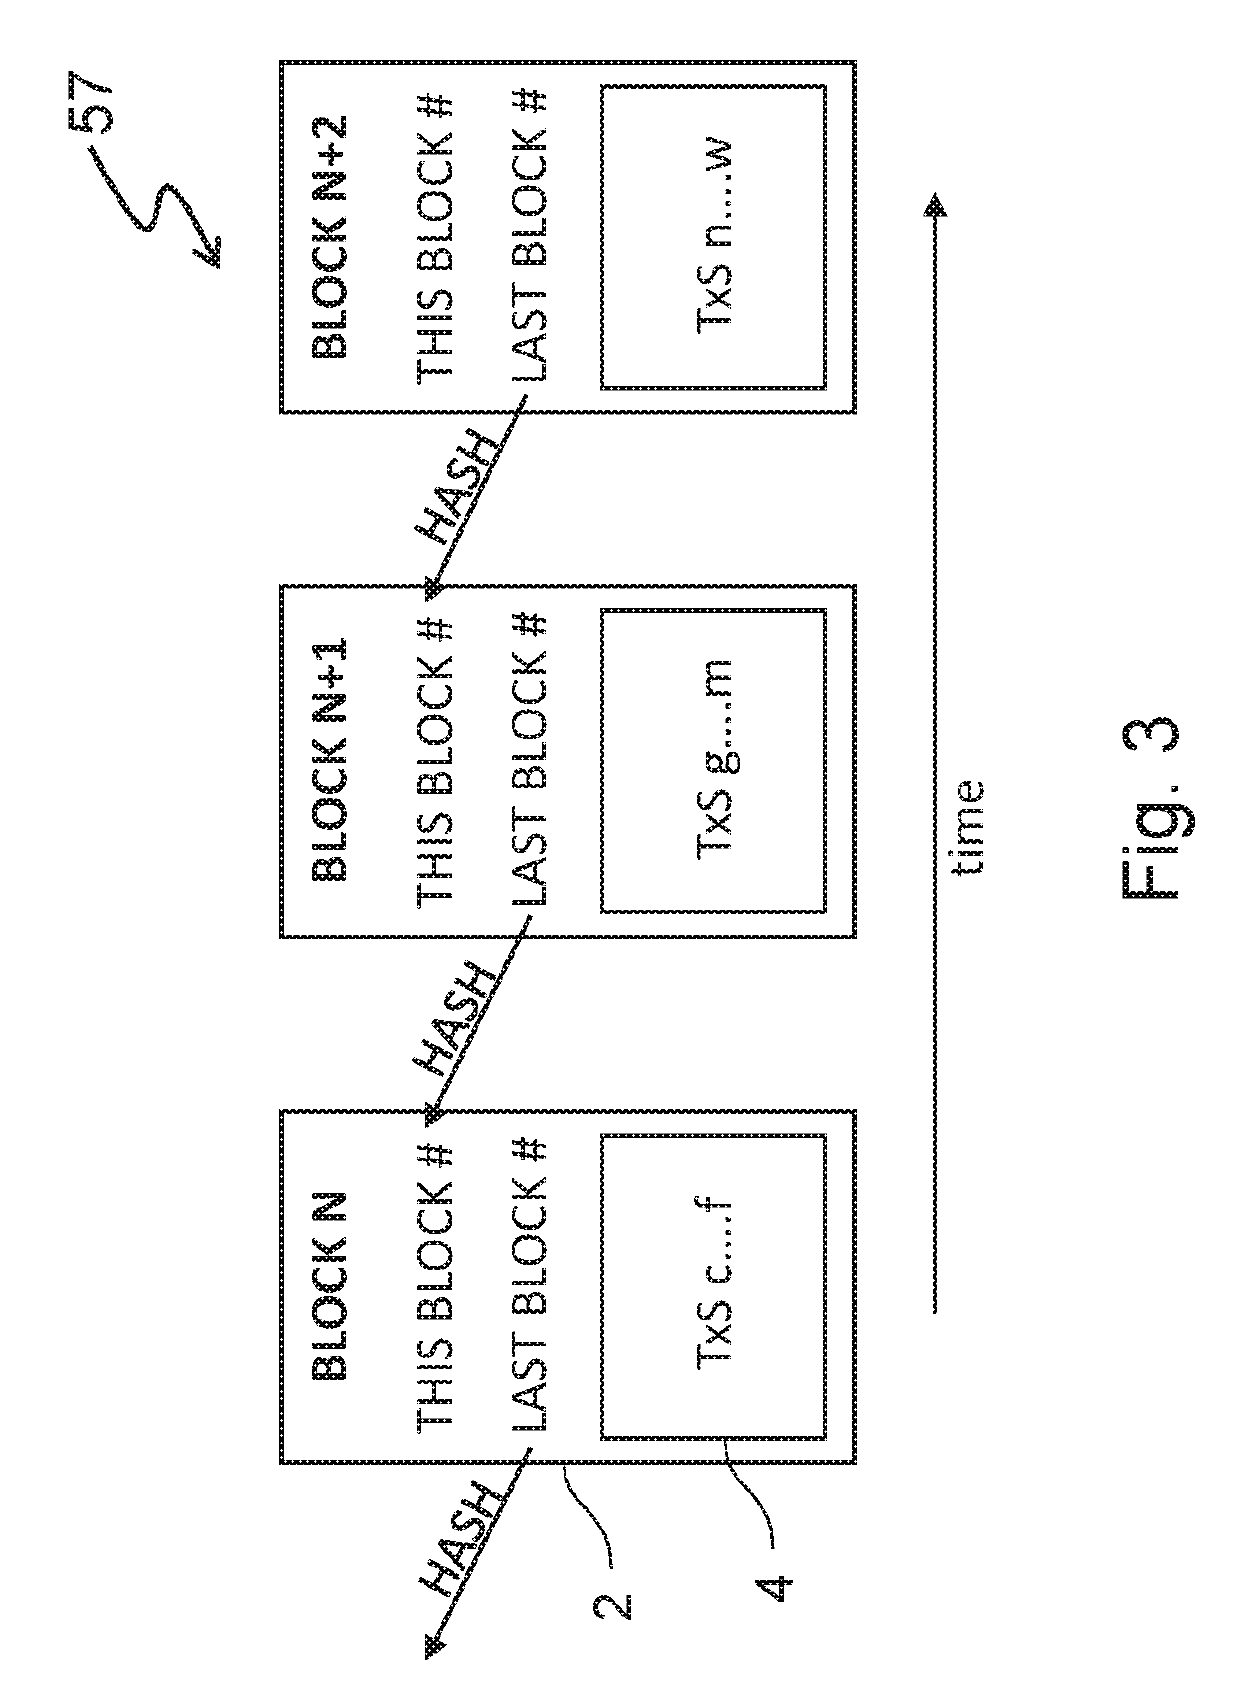 Container-based operating system and method